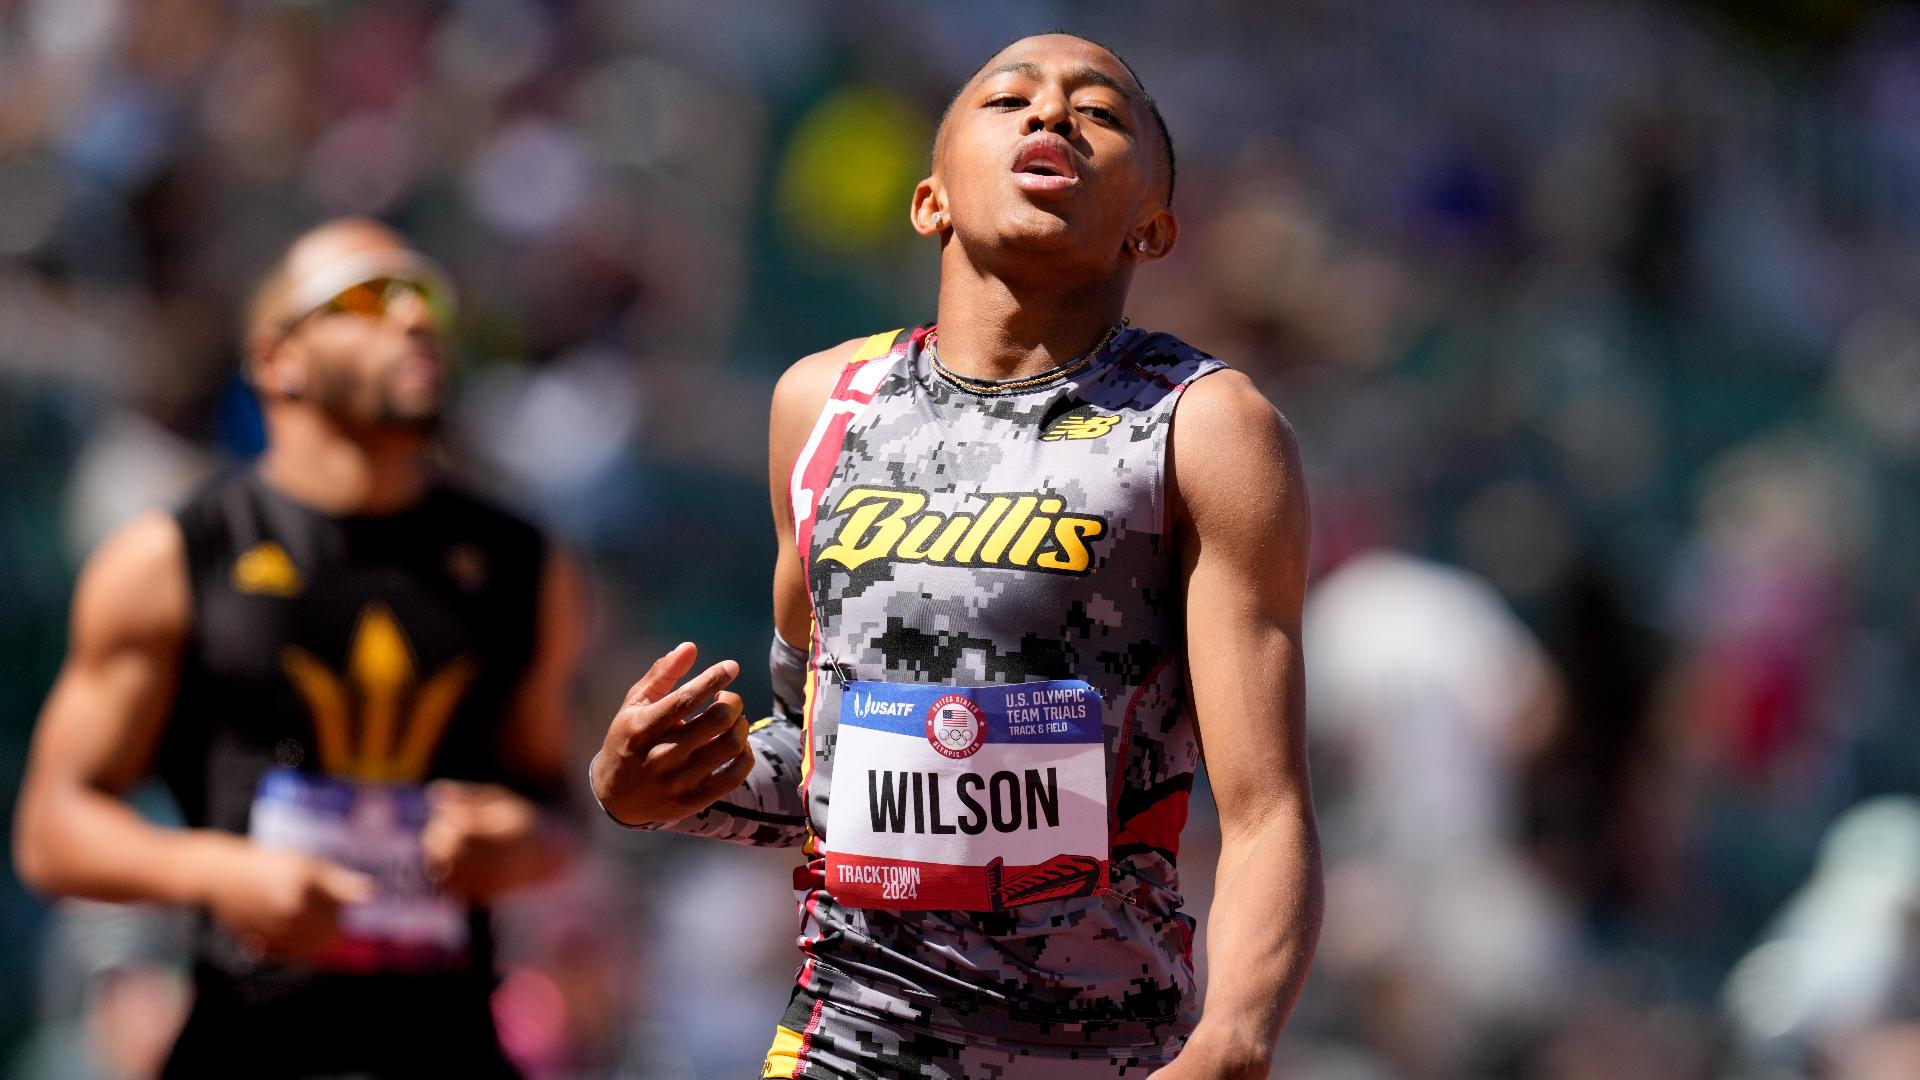 Quincy Wilson grew up in Chesapeake until he was 8 years old before his parents moved to the Bowie, Maryland area.